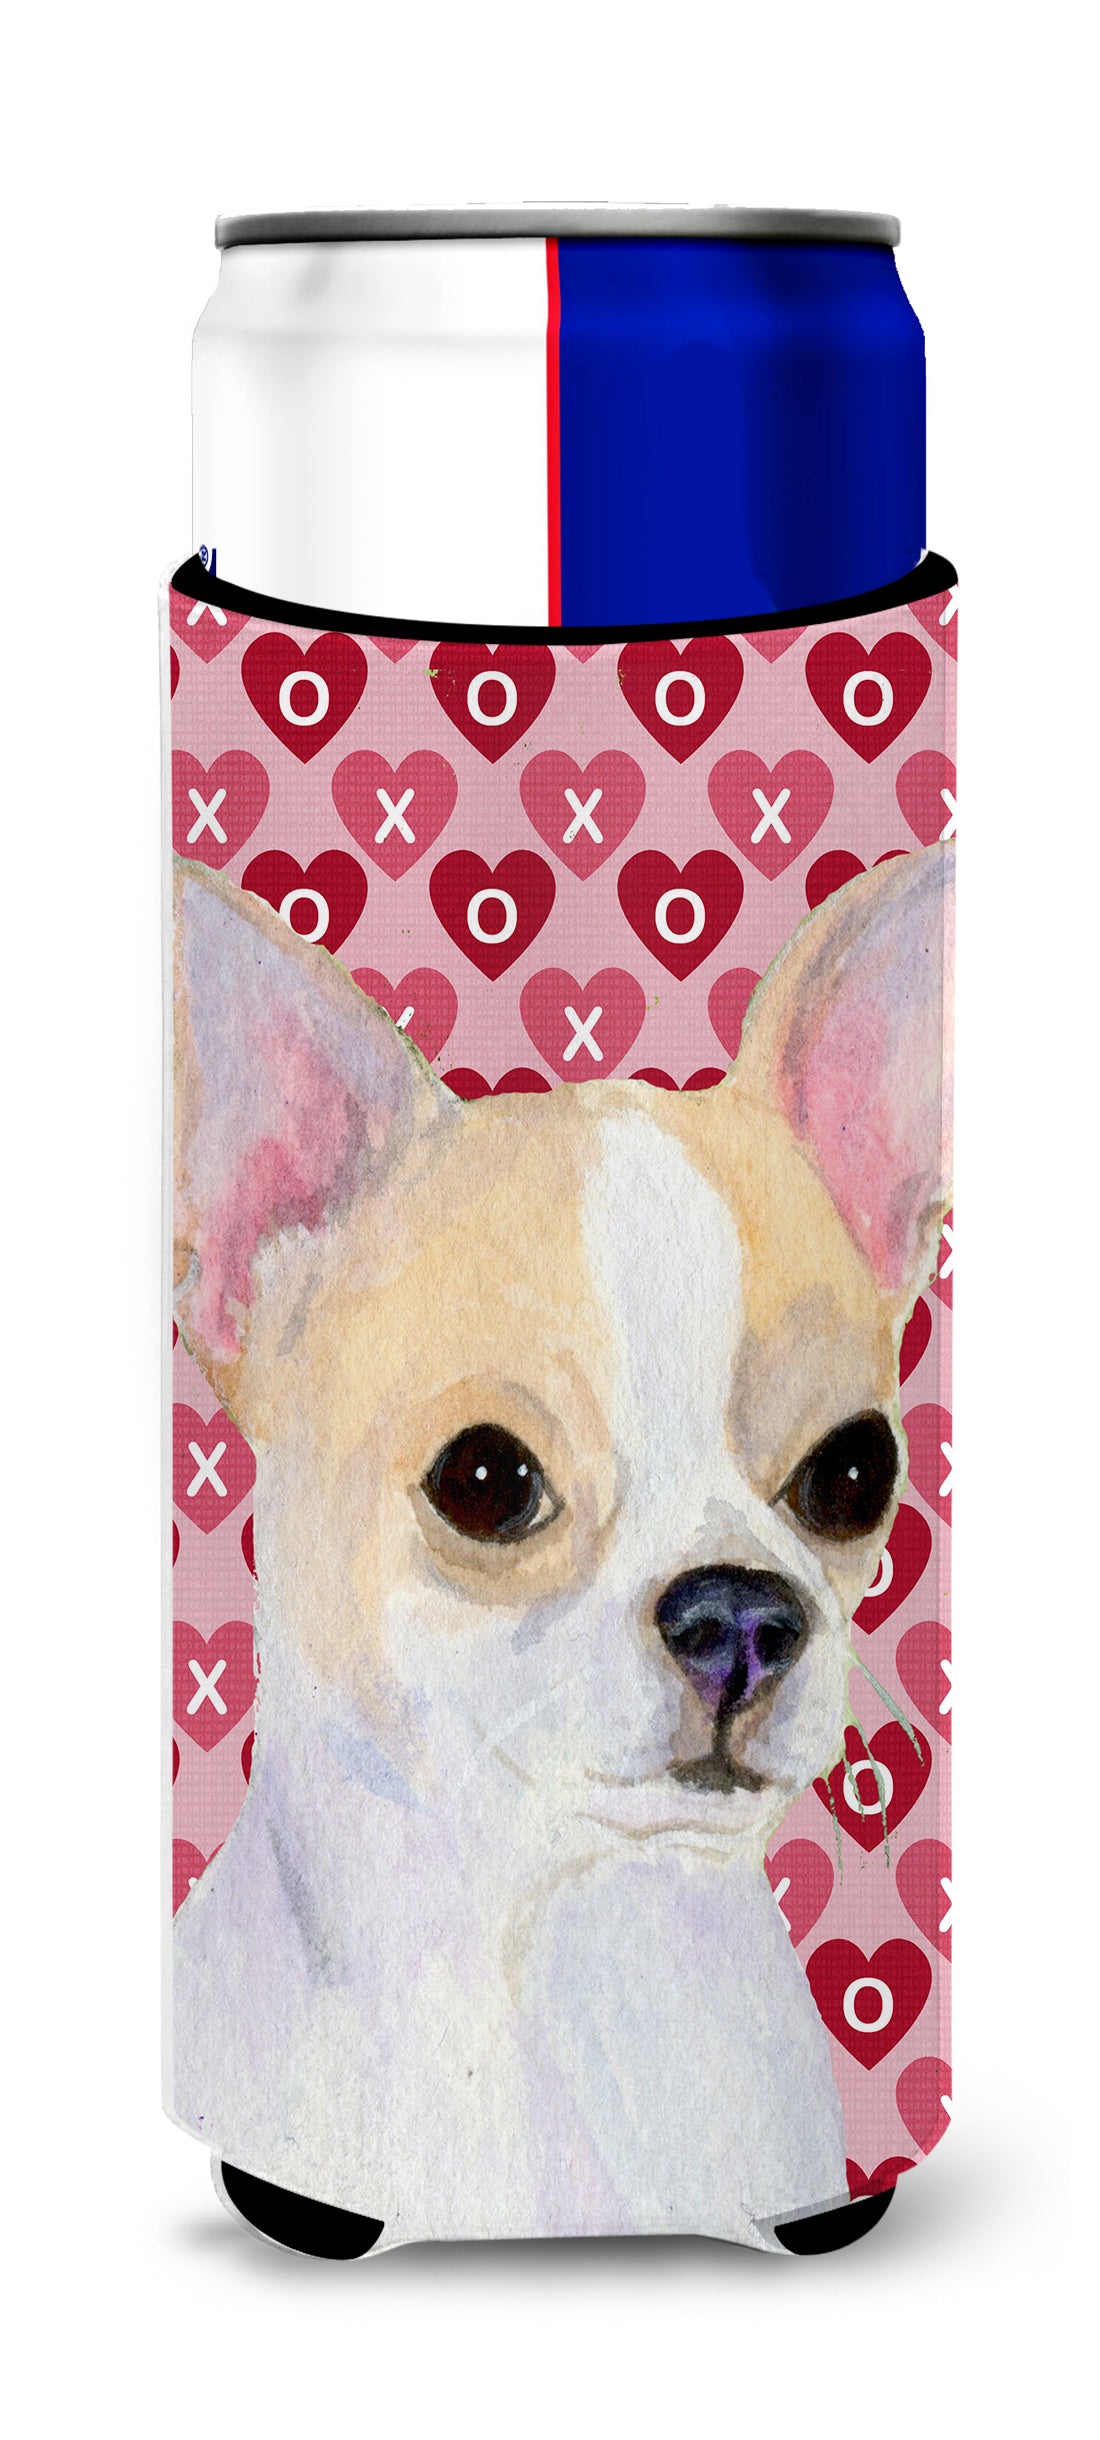 Chihuahua Hearts Love and Valentine's Day Portrait Ultra Beverage Insulators for slim cans SS4474MUK